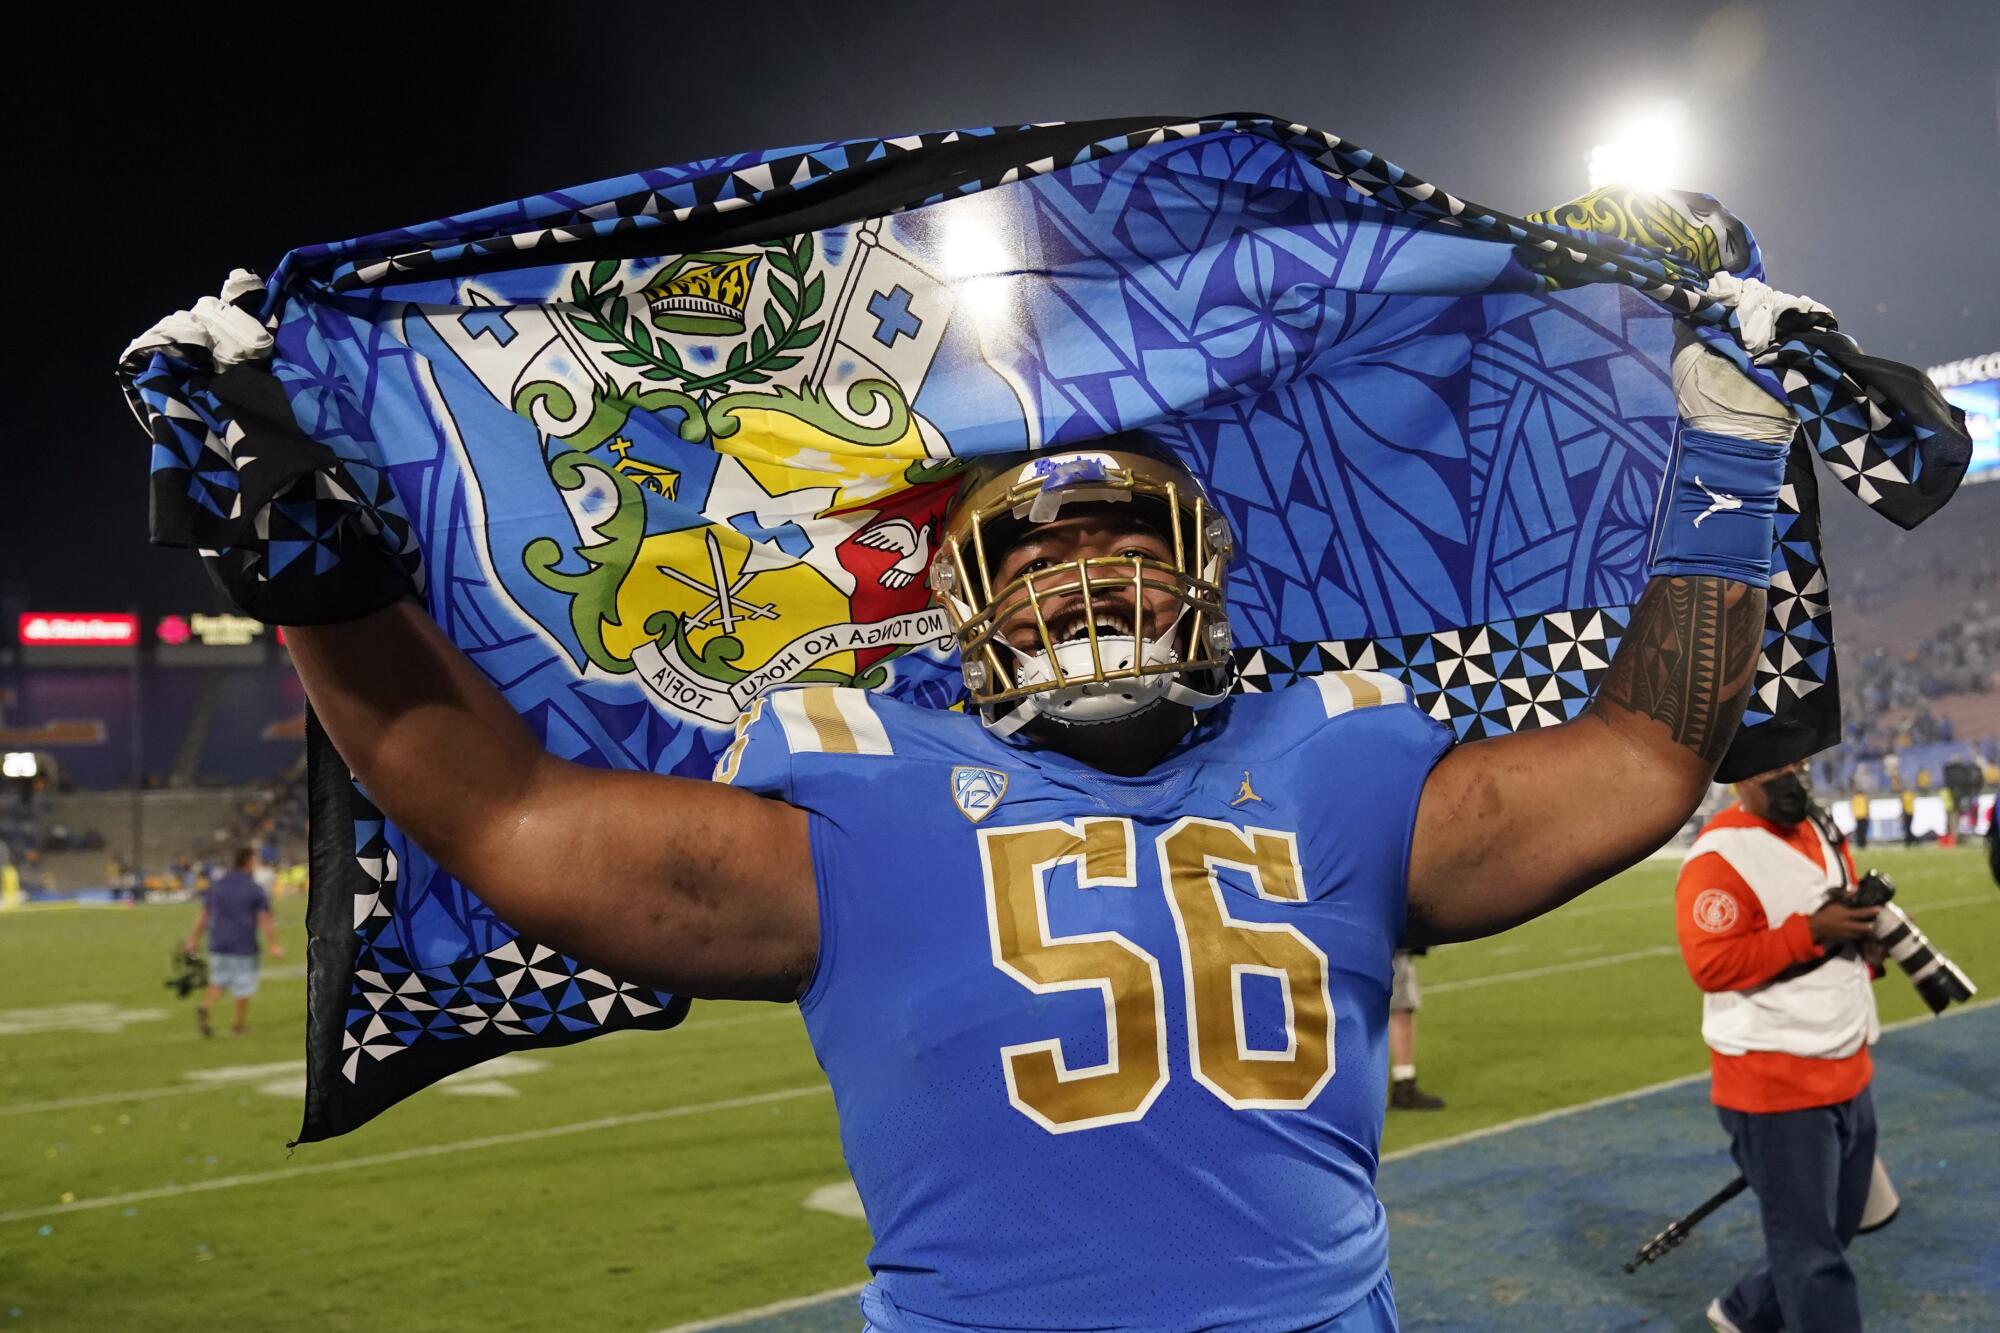 UCLA offensive lineman Atonio Mafi waves a flag as he celebrates the team's win over LSU.